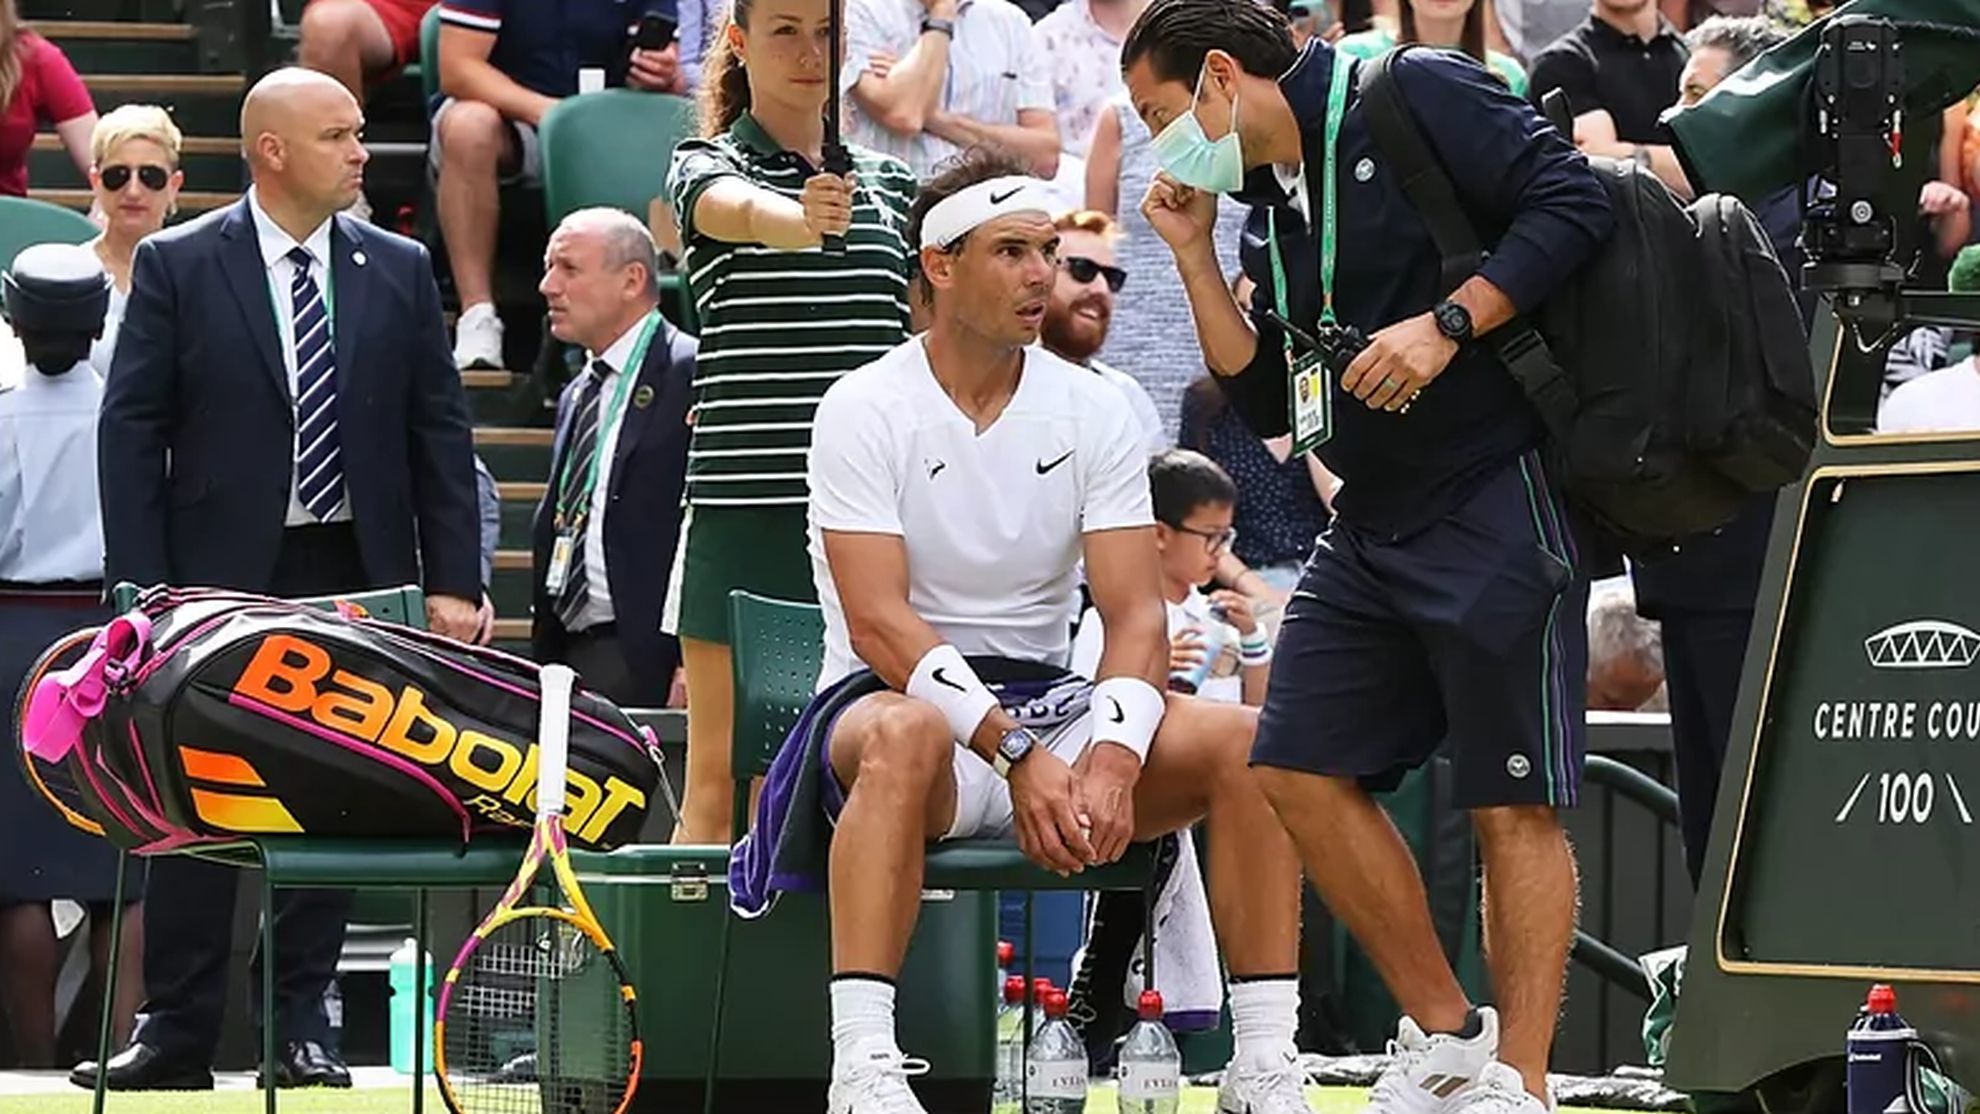 Nadal gets treatment during his match vs Taylor Fritz